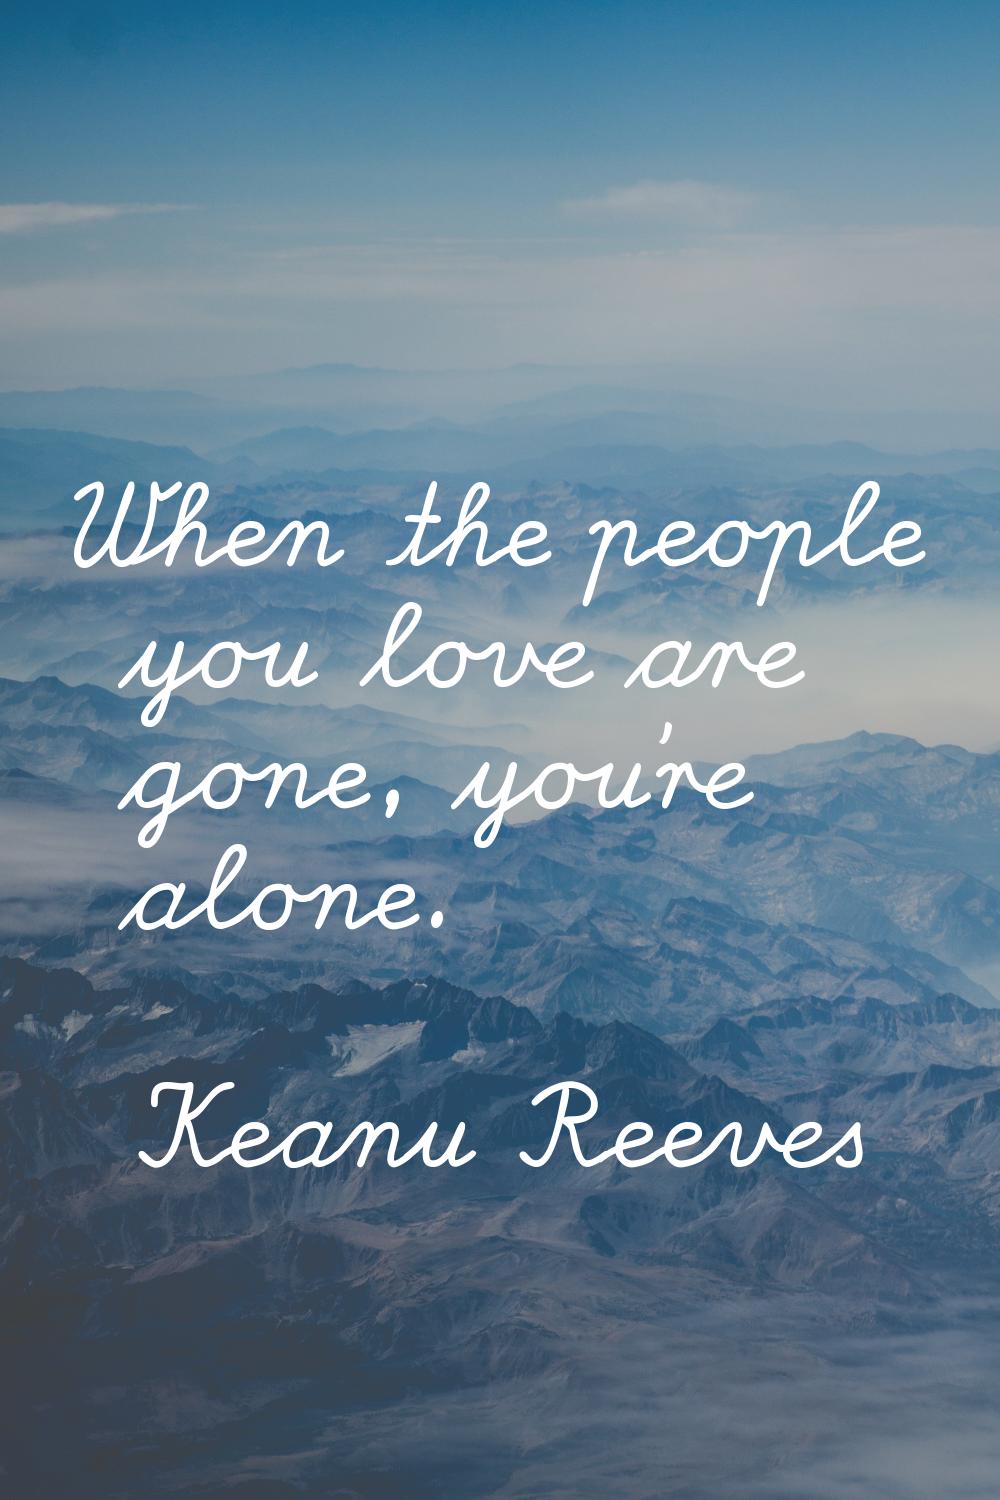 When the people you love are gone, you're alone.